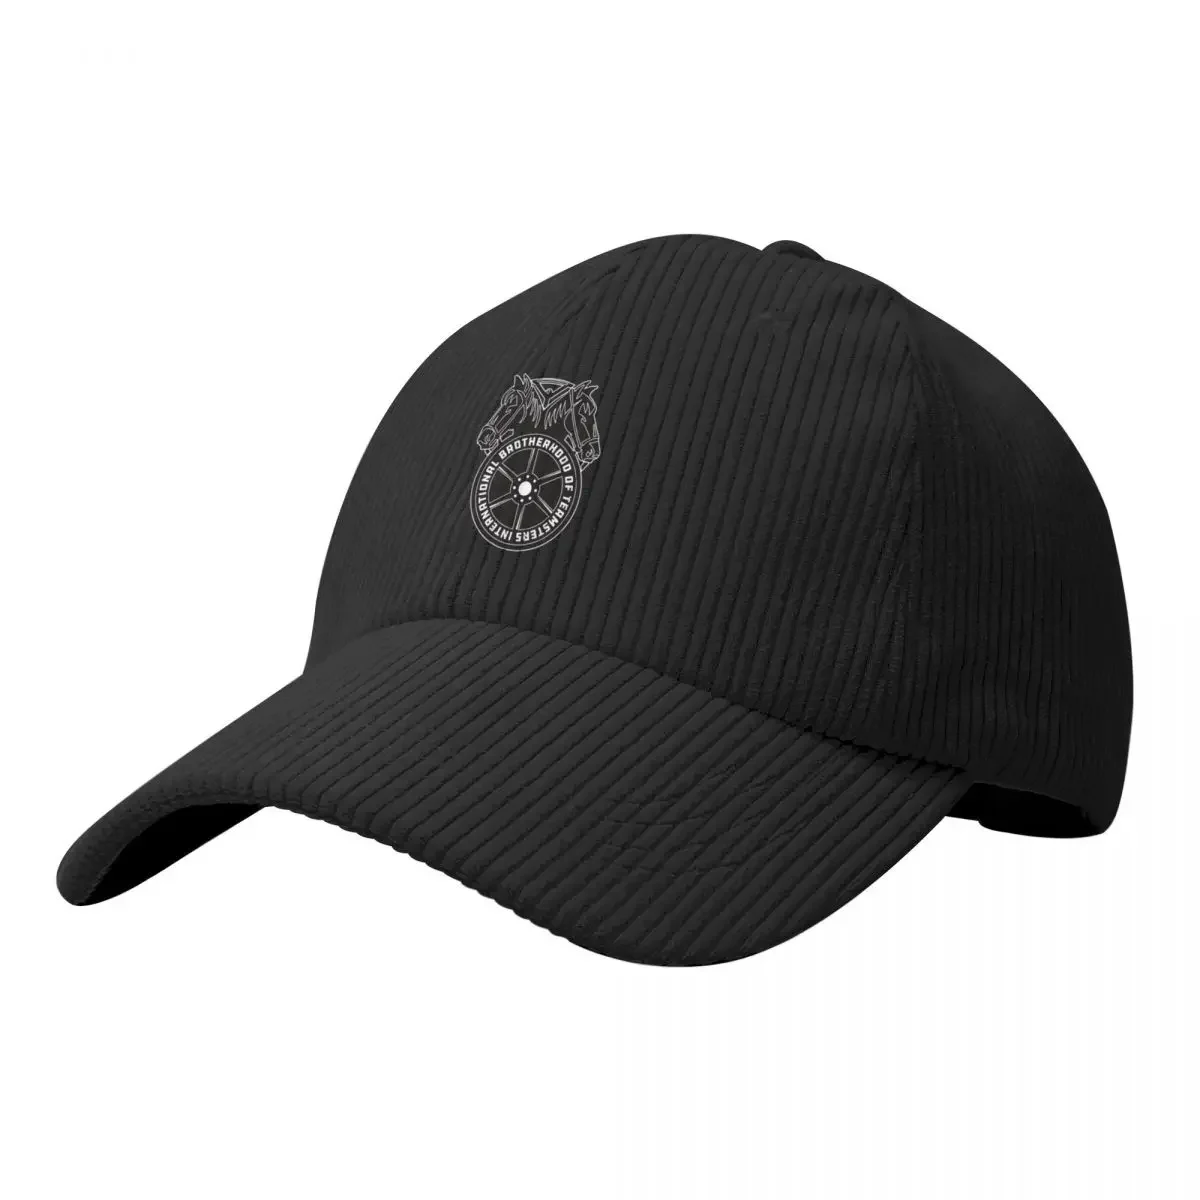 

Minimalist Black & white Classy Teamsters gifts design for Union workers Corduroy Baseball Cap western Hat Golf Men Women's